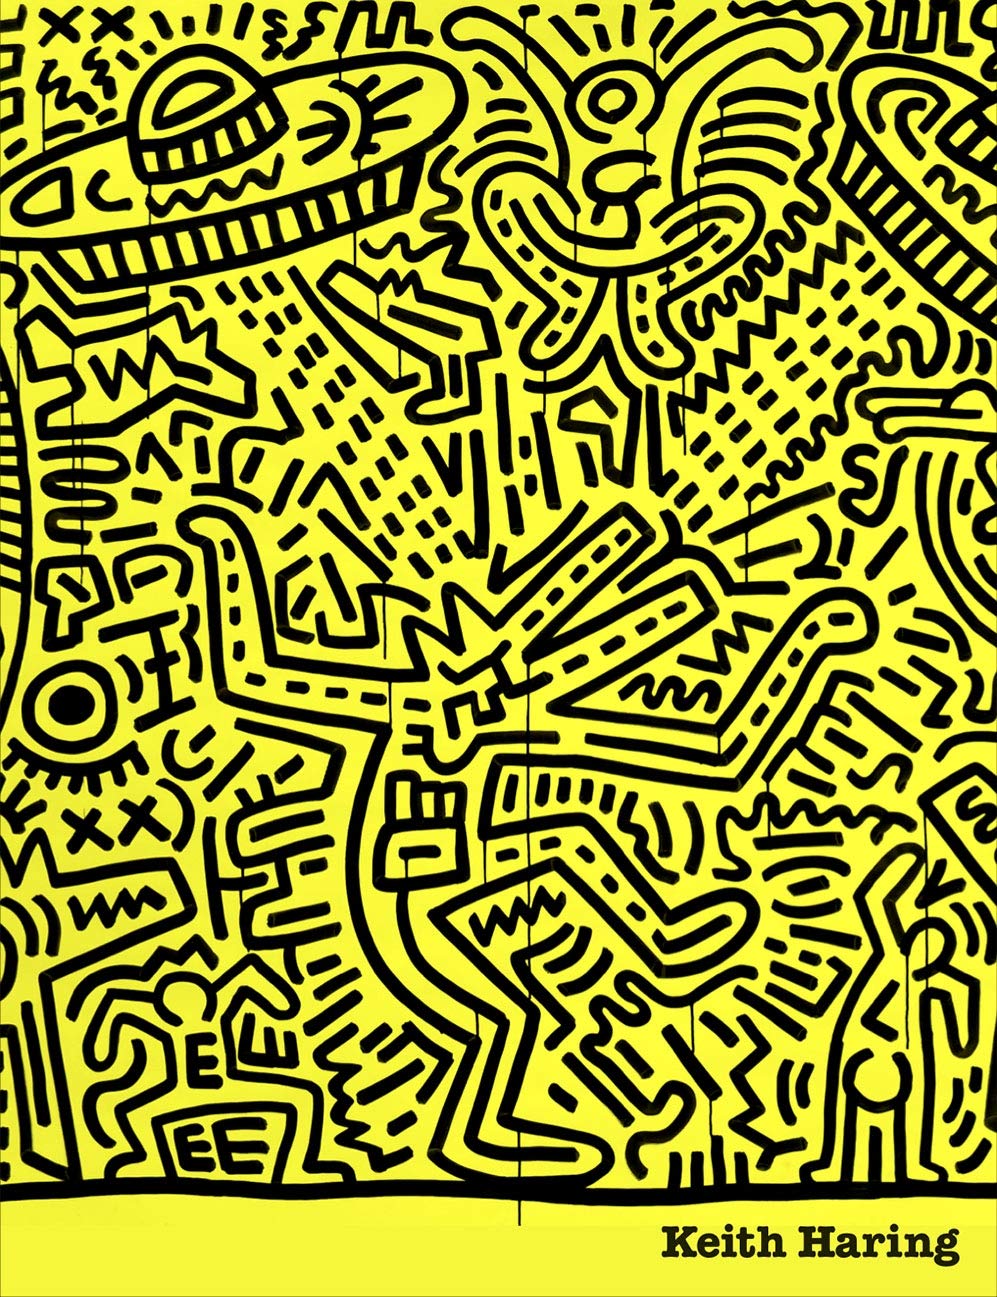 Keith Haring – other books